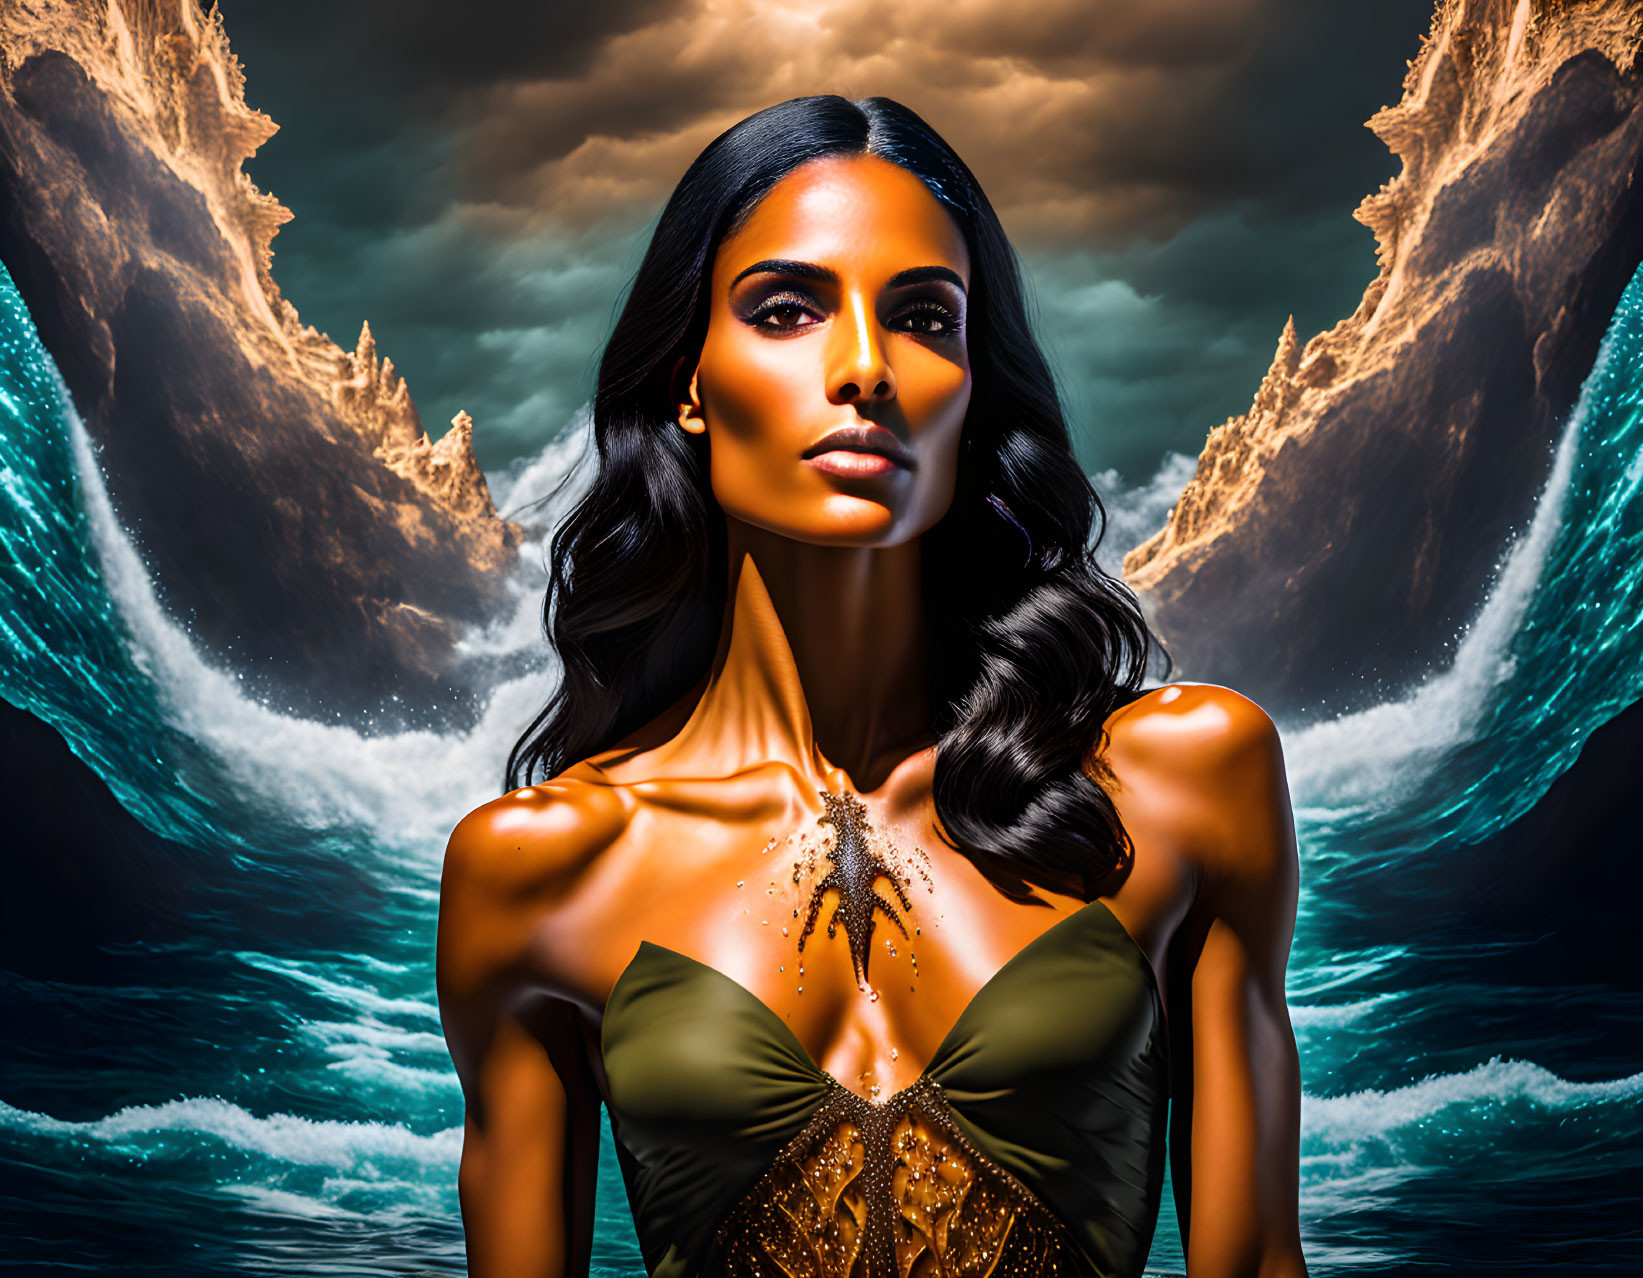 Portrait of woman with glossy hair and golden body art against dramatic ocean backdrop